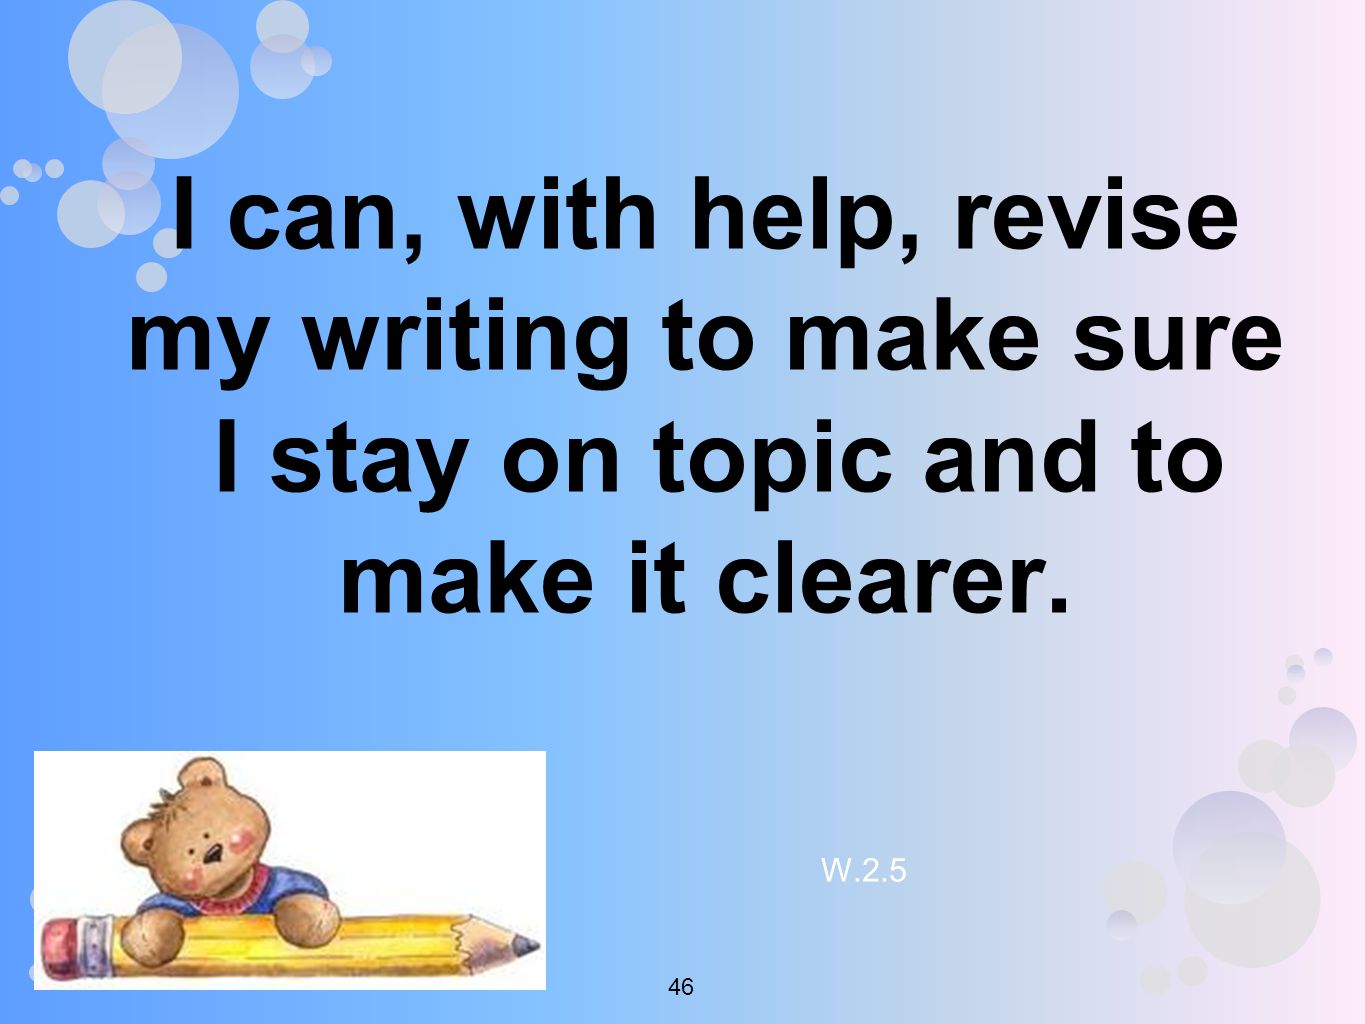 I can, with help, revise my writing to make sure I stay on topic and to make it clearer. W